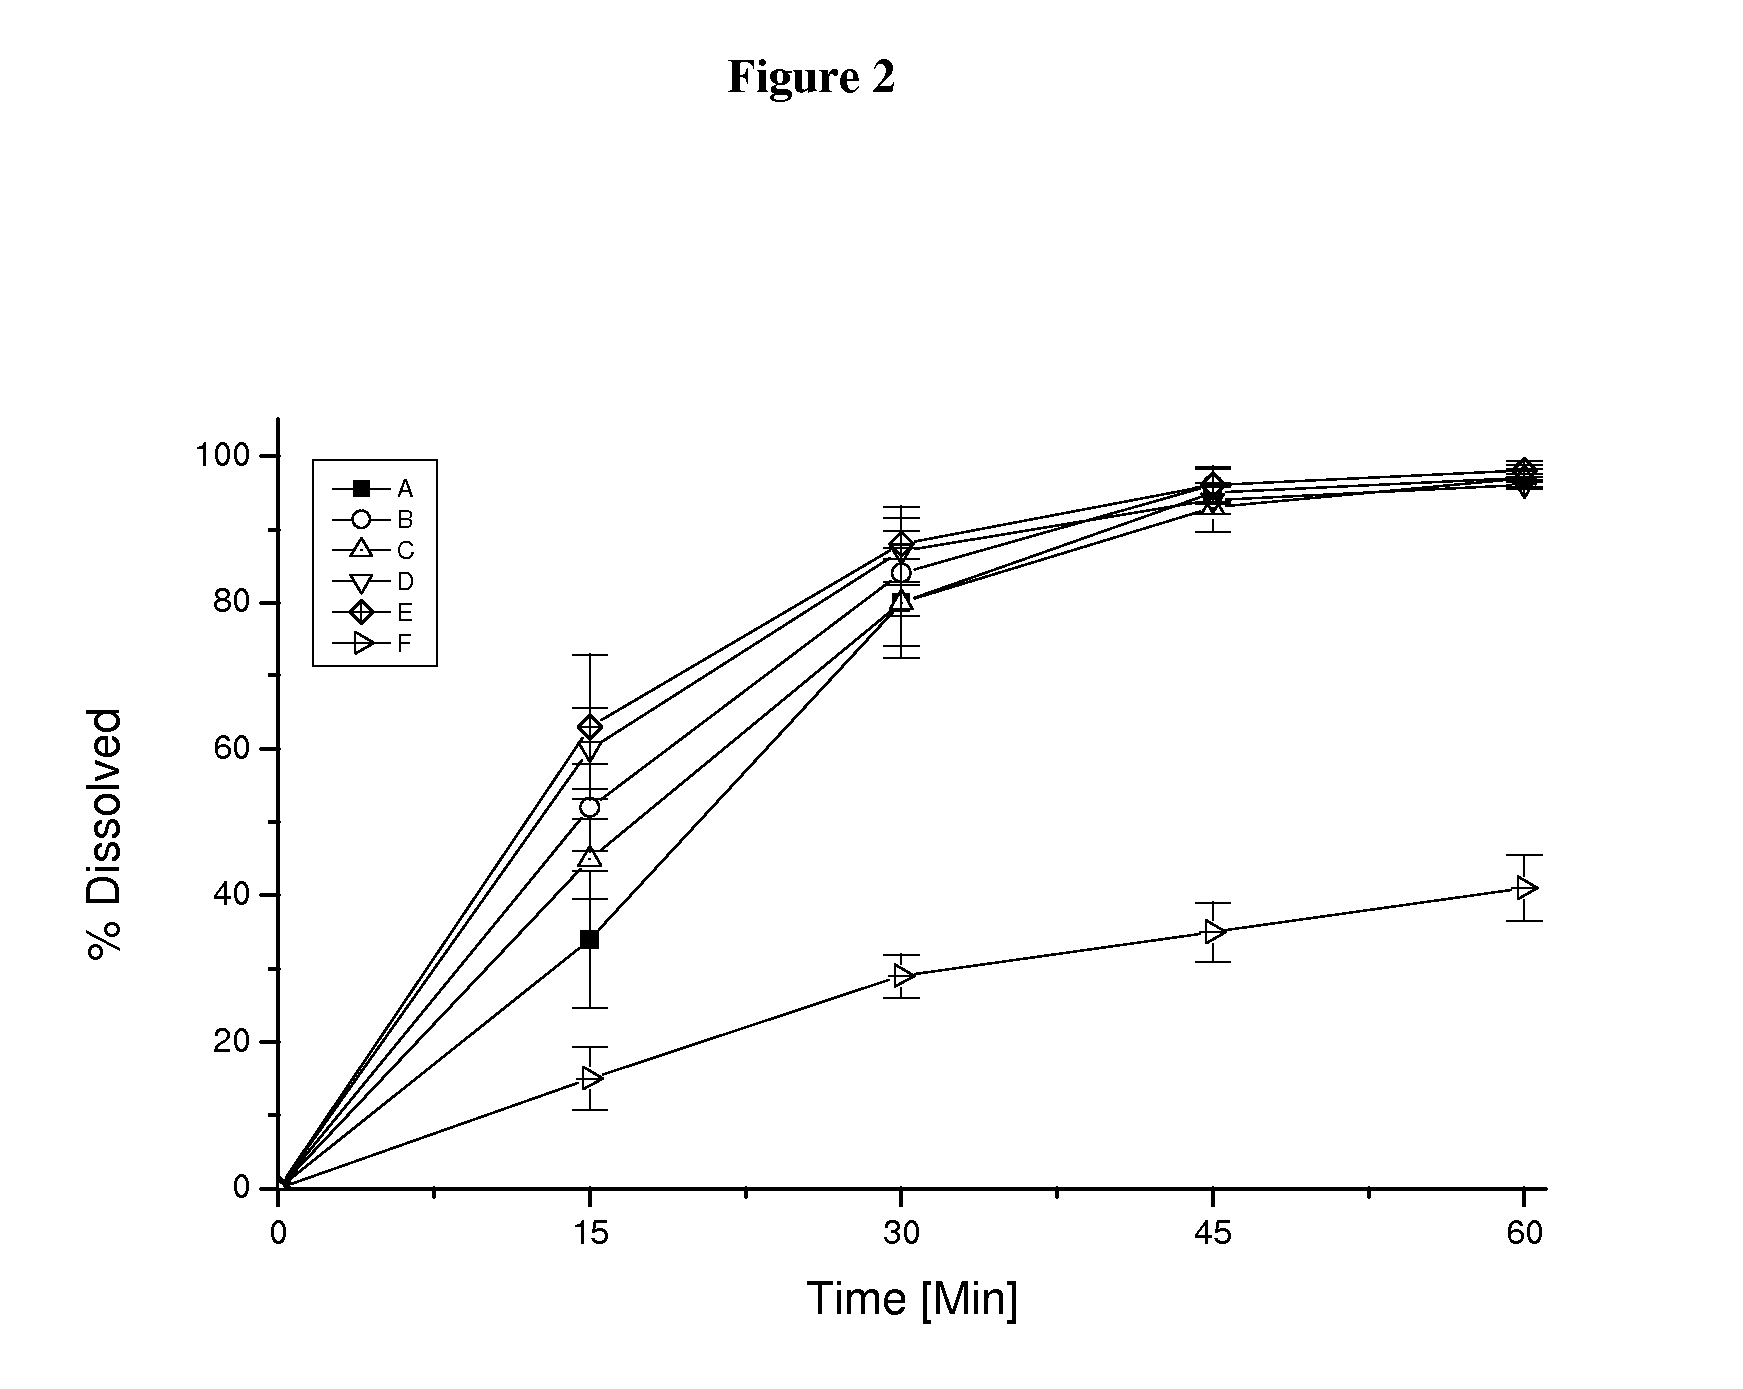 Capsule pharmaceutical dosage form comprising a suspension formulation of an indolinone derivative